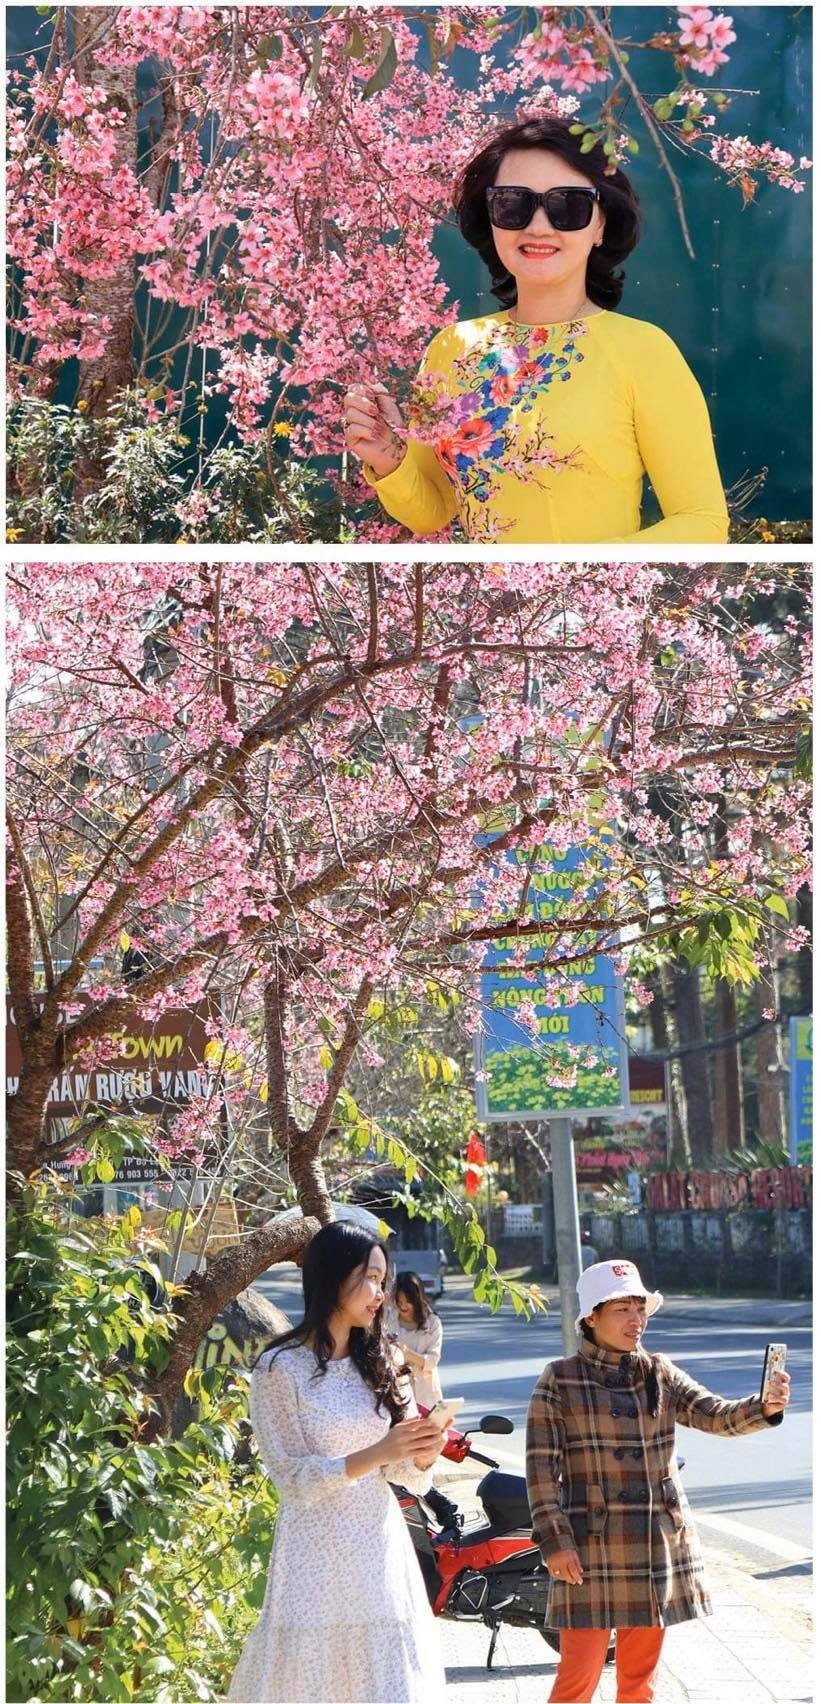 Da Lat turns a ravishing shade of pink with cherry blossoms in full bloom ảnh 6